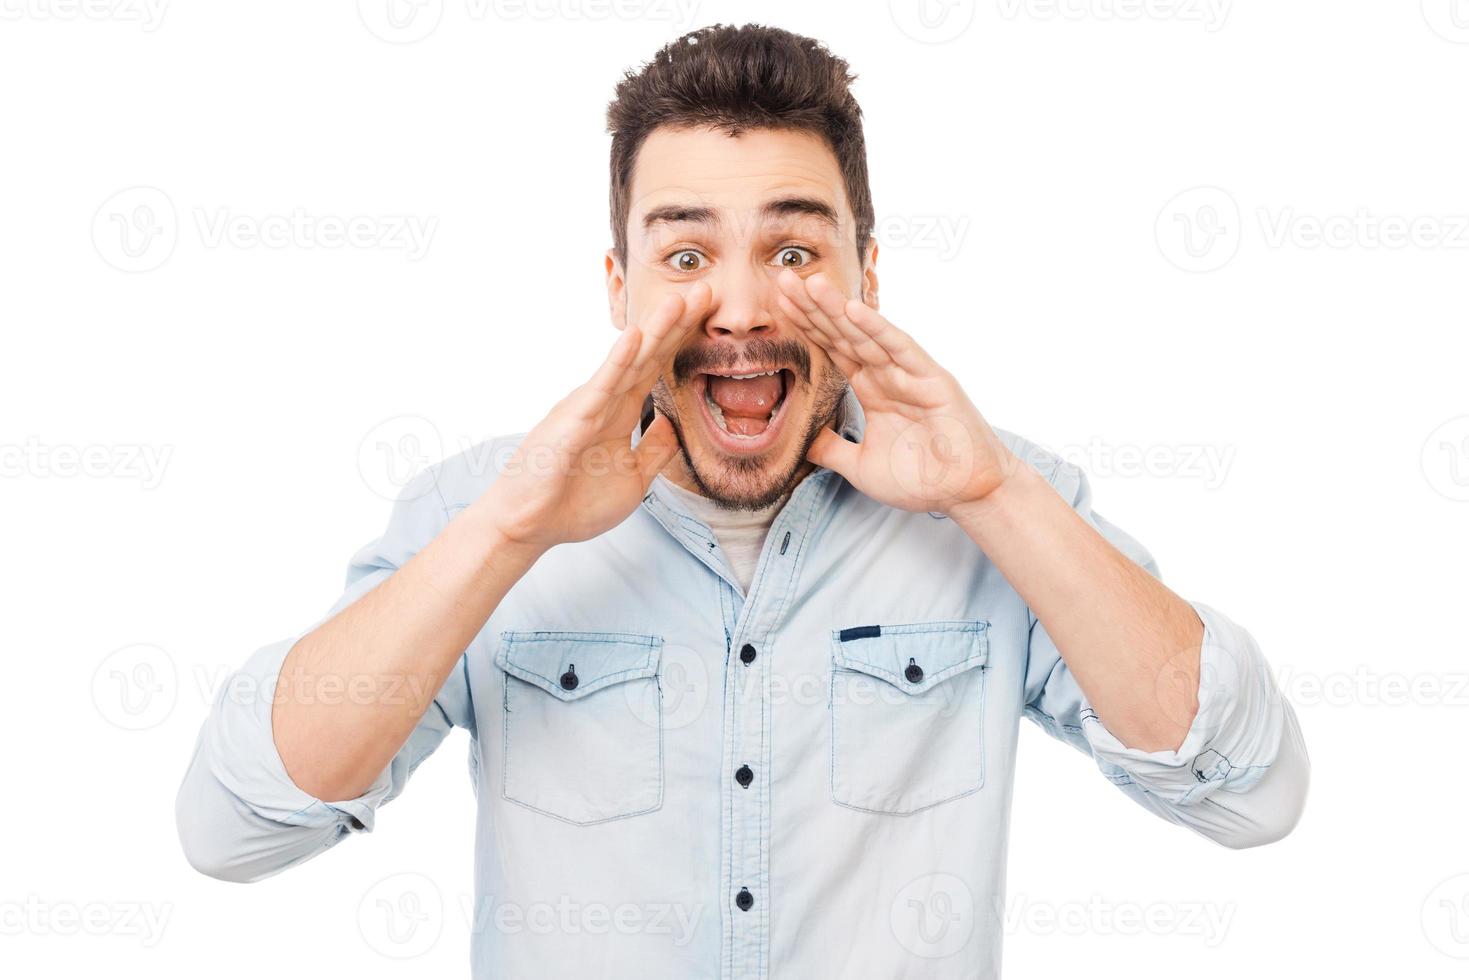 Great news Cheerful young man in holding hands near mouth and shouting while standing against white background photo